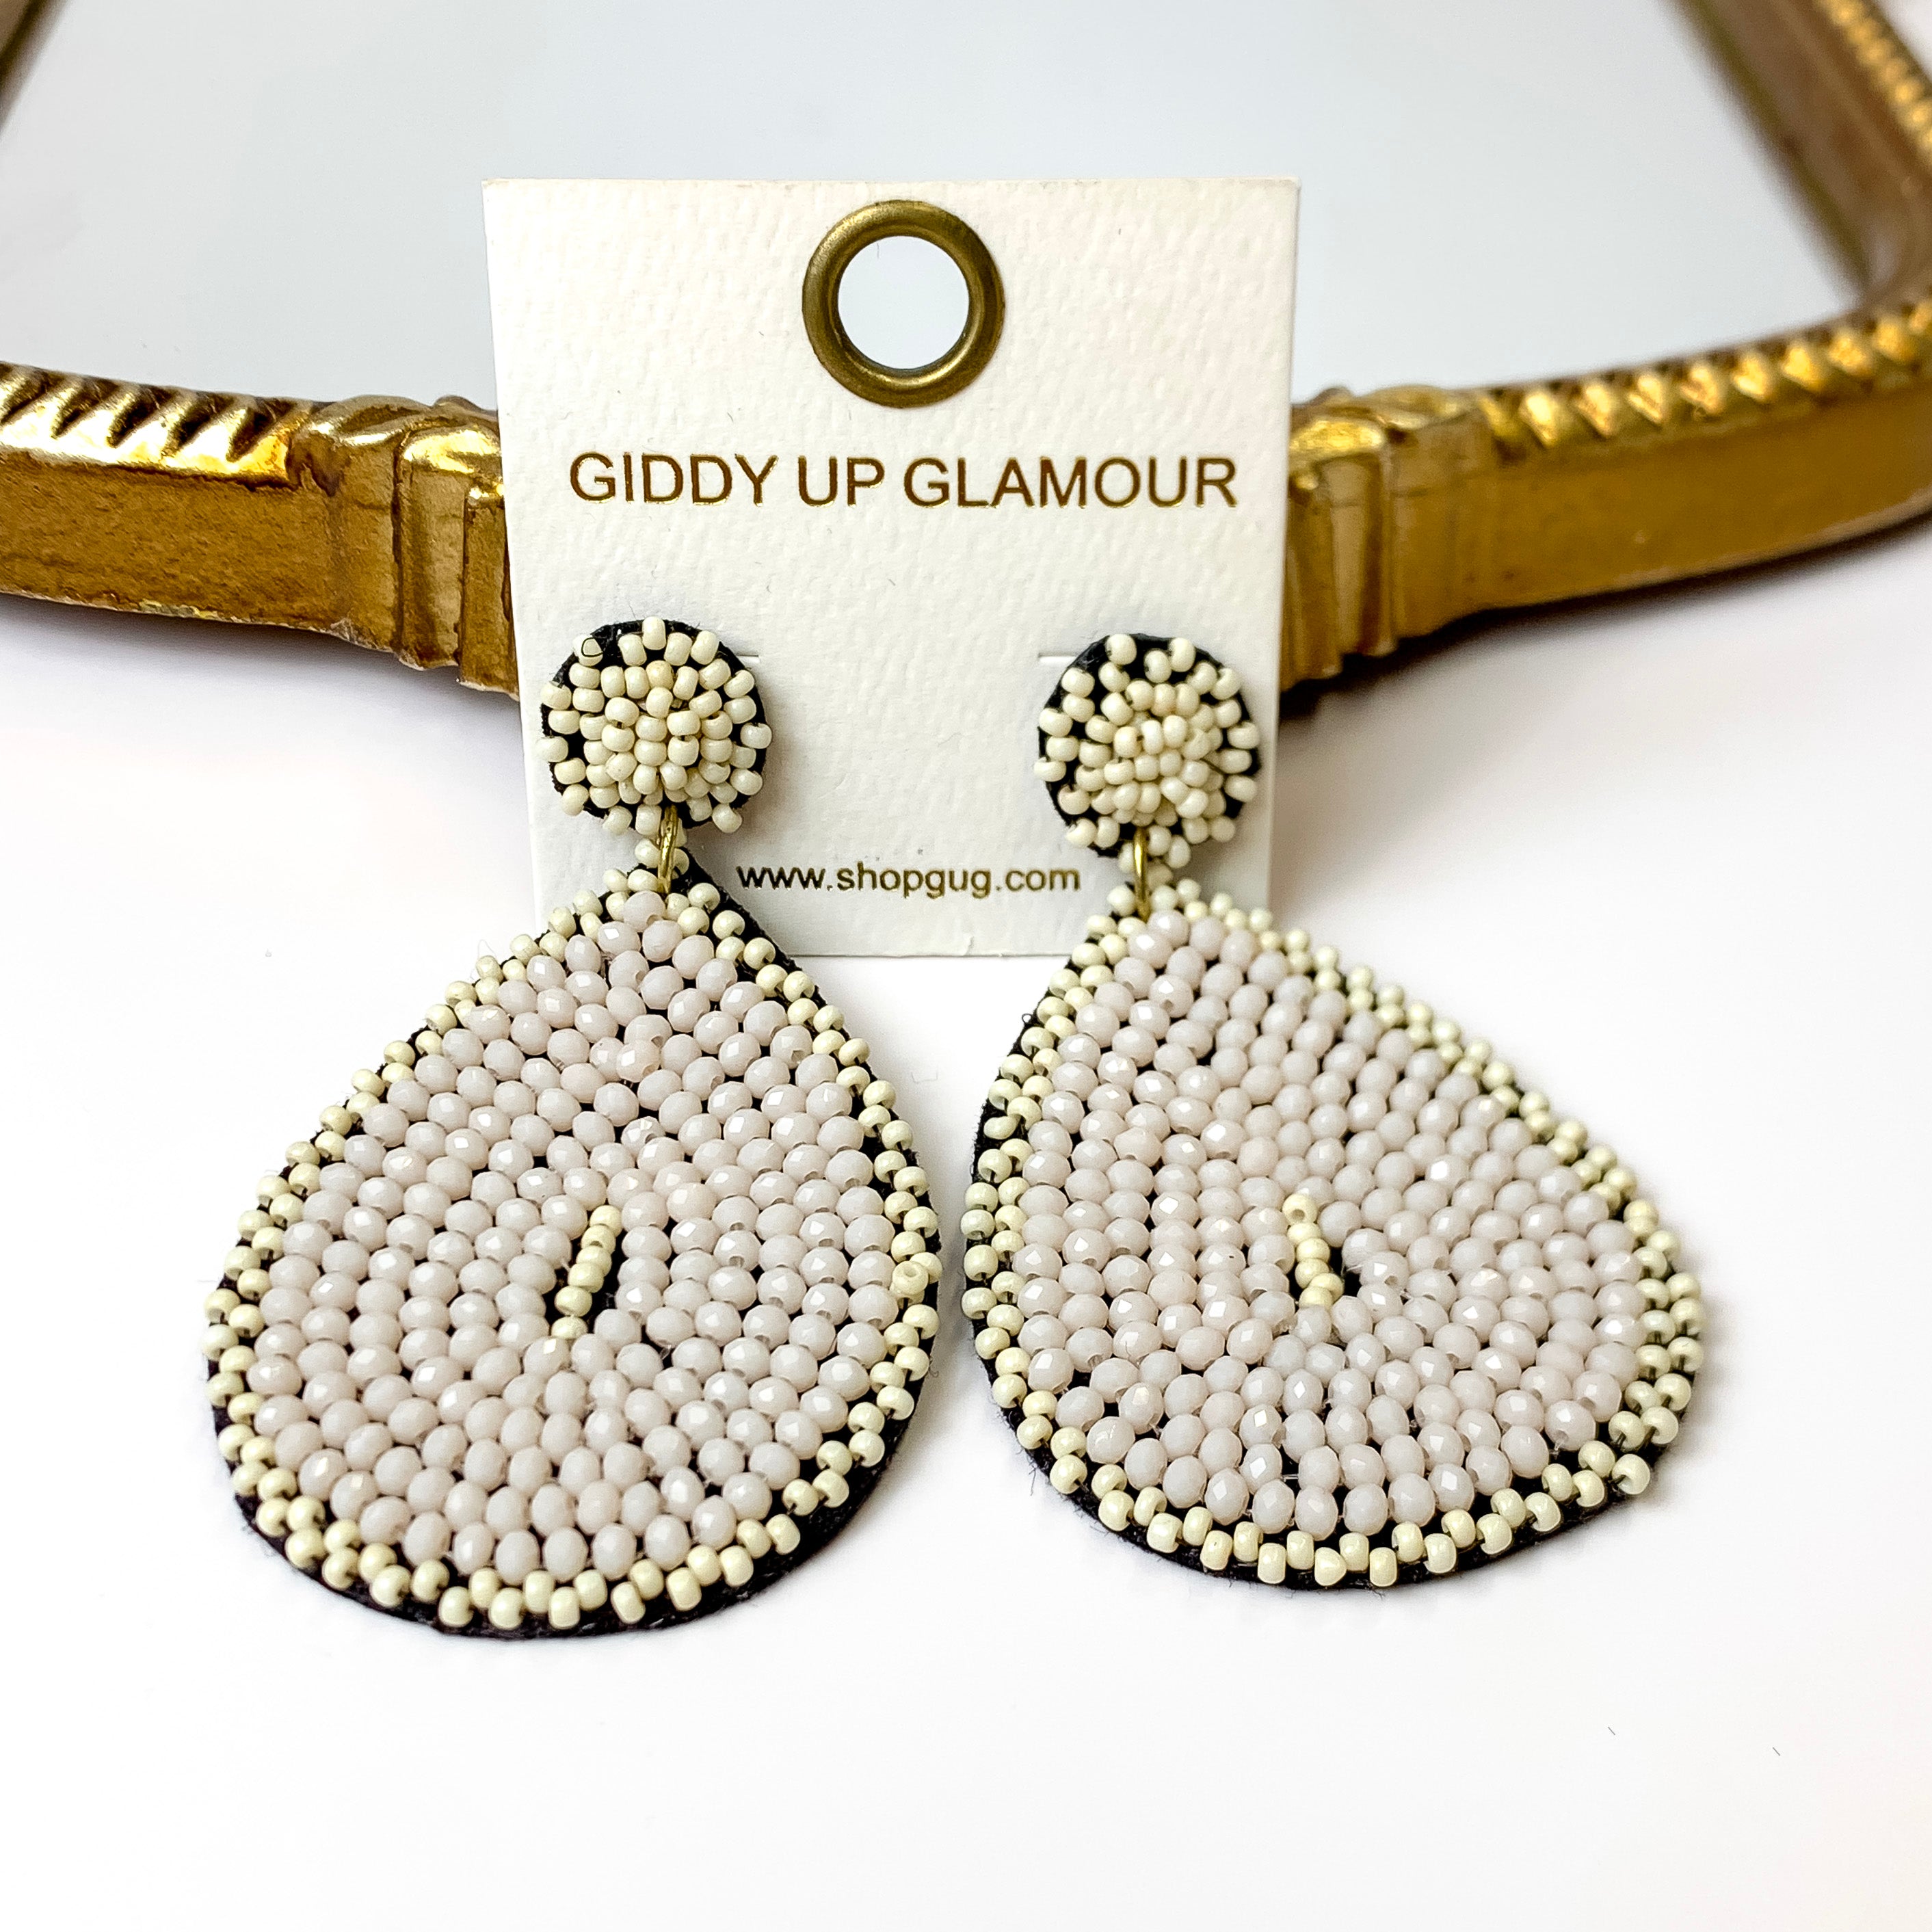 Seed Bead Teardrop Earrings in Ivory White - Giddy Up Glamour Boutique